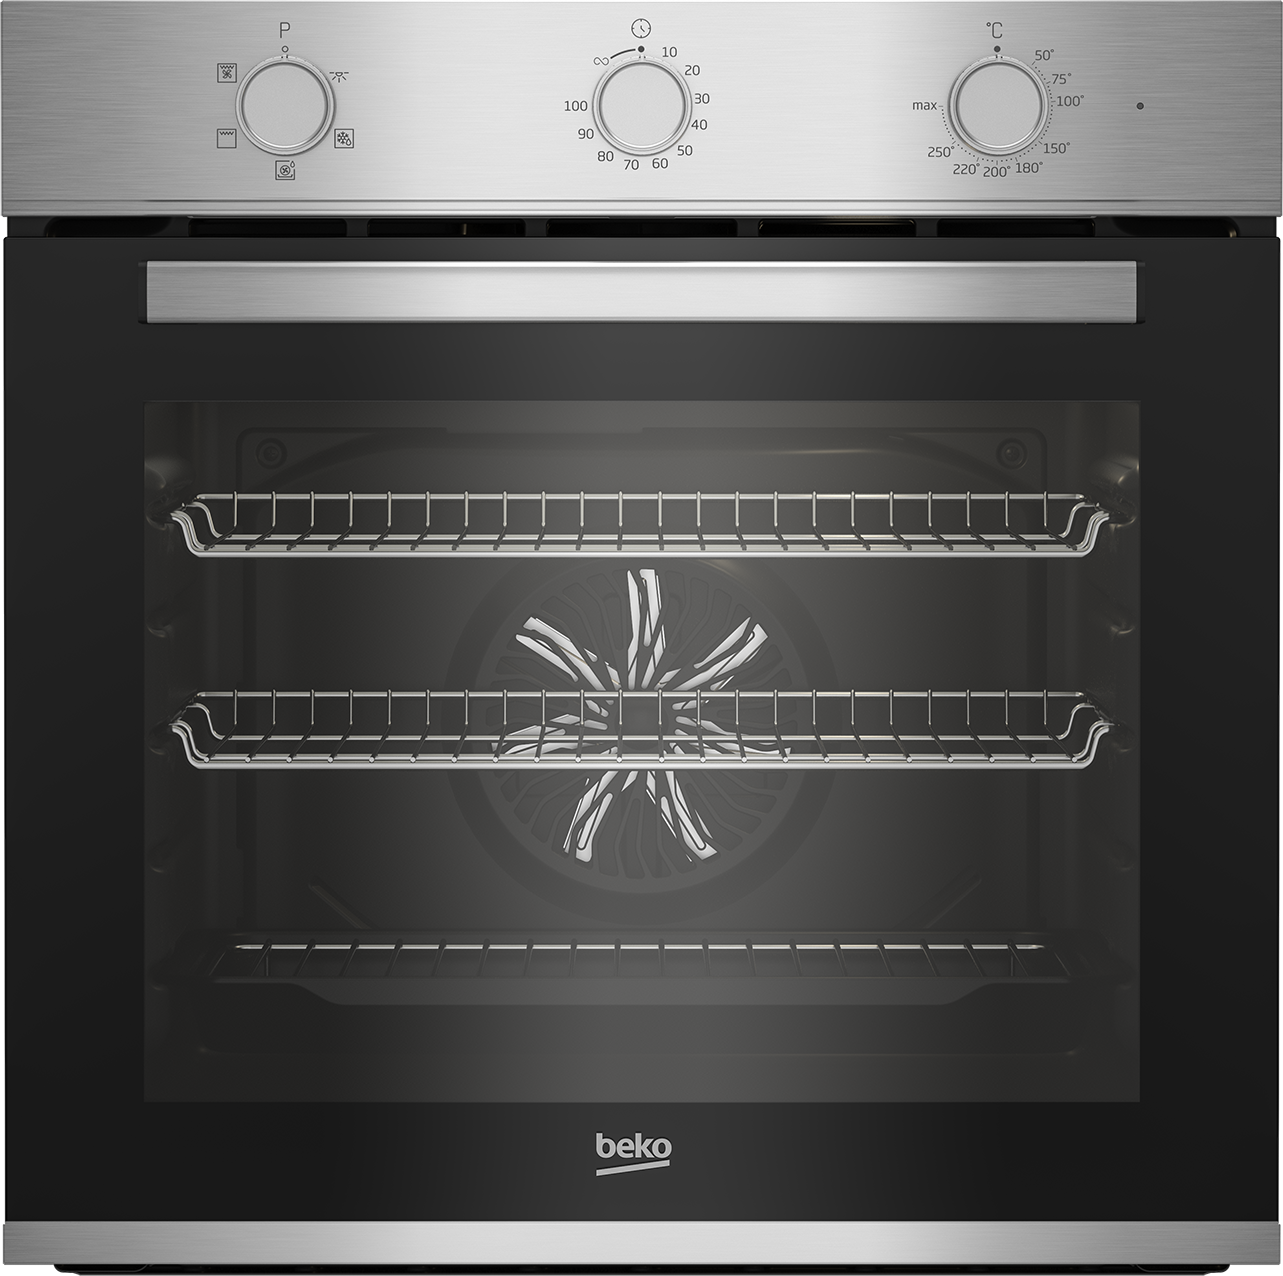 Beko AeroPerfect RecycledNet BBIF22100X Built In Electric Single Oven - Stainless Steel - A Rated, Stainless Steel